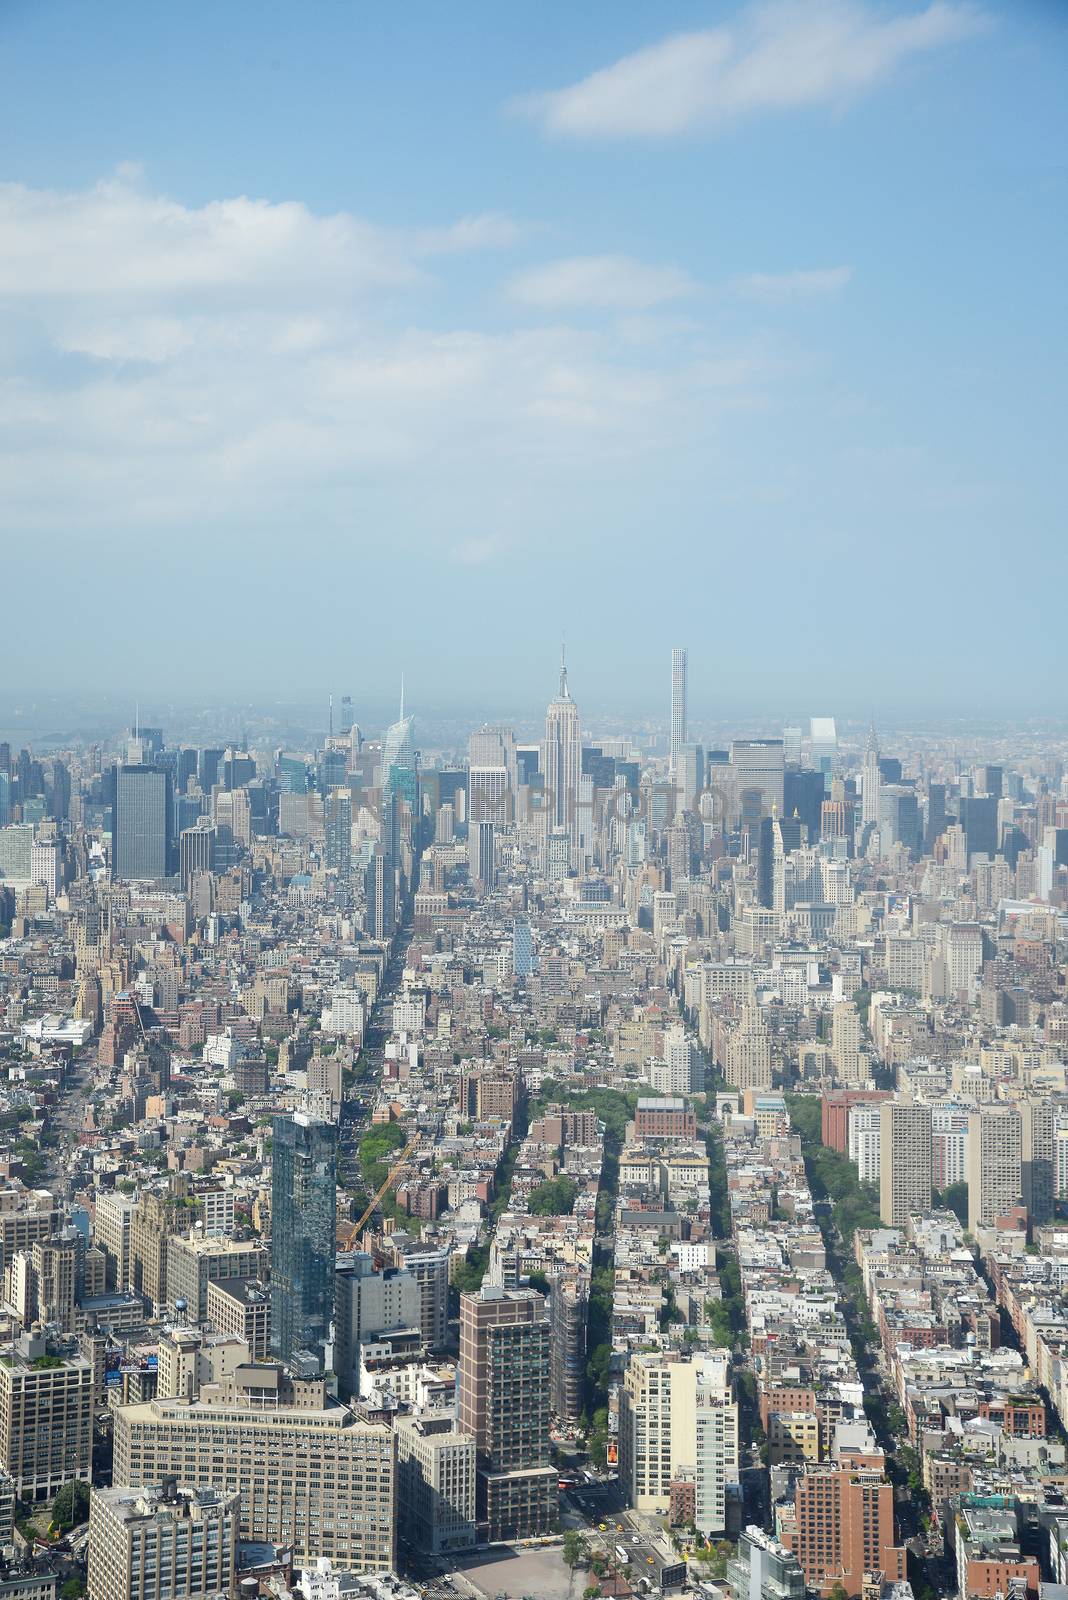 a view of new york downtown as seen from one world trade center observatory deck